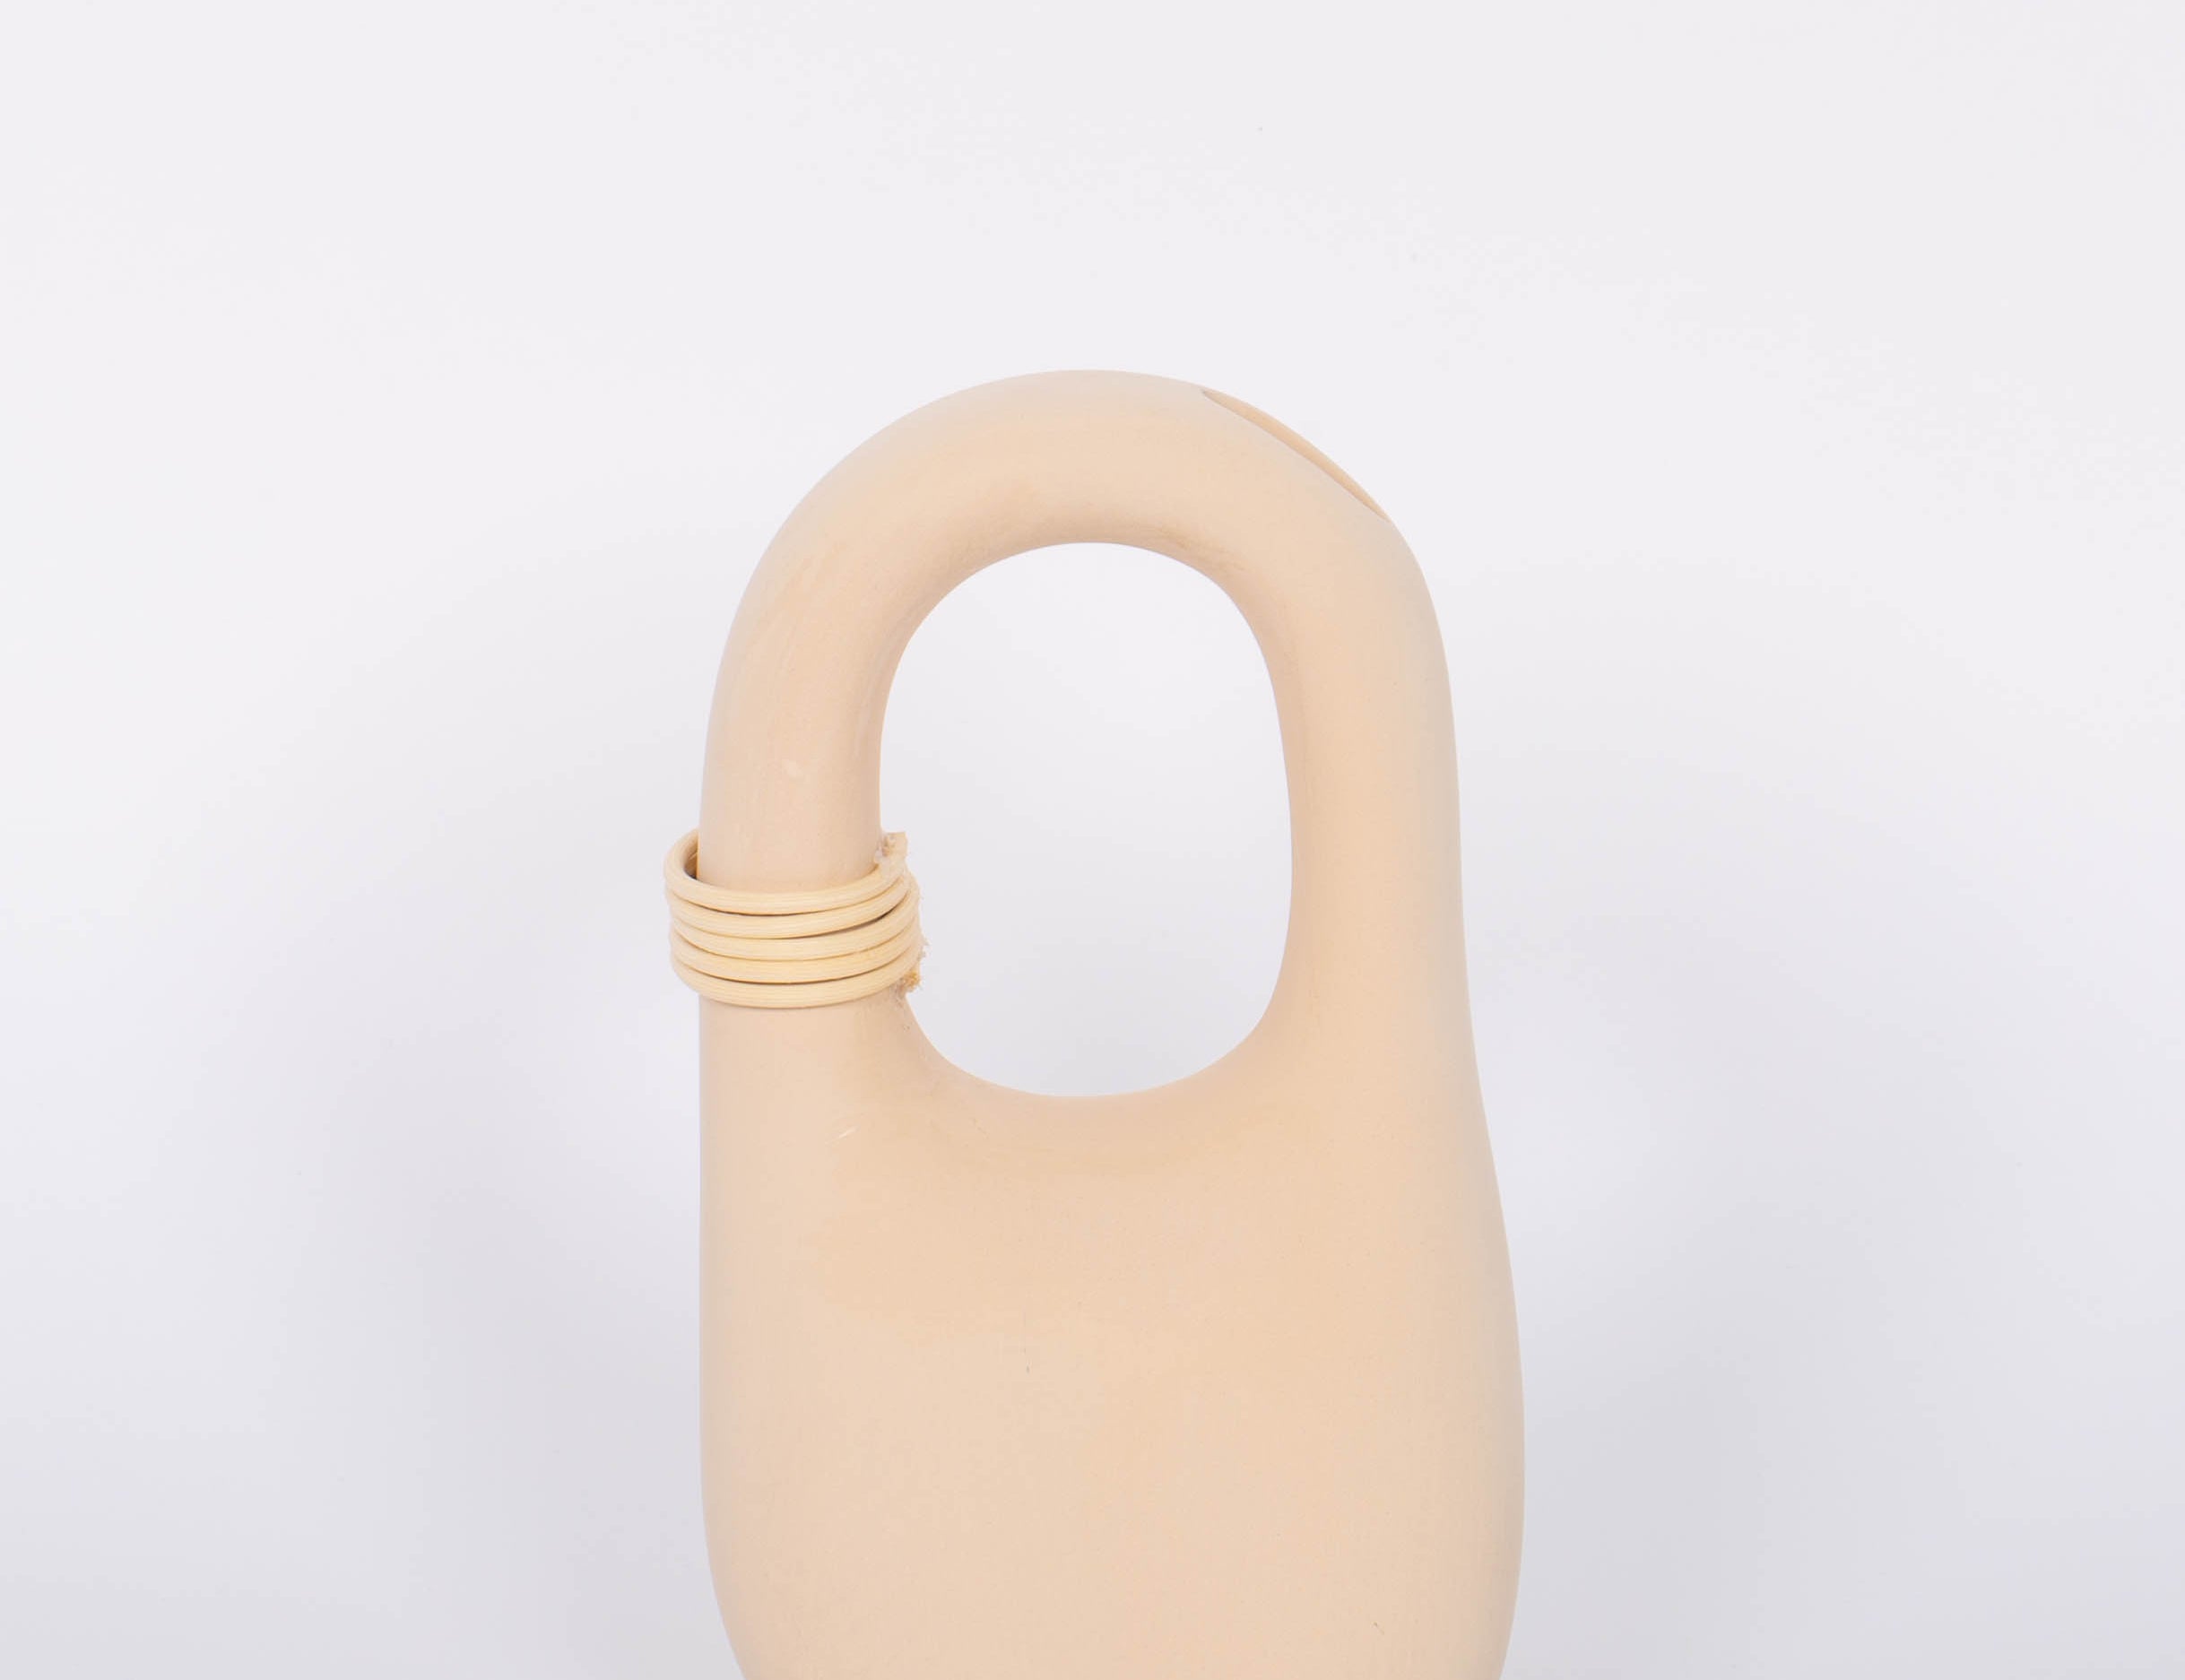 Palau Tan Vase matte finish with natural bisque cermaic, unique handle feature and wrapped rattan coil. White background.